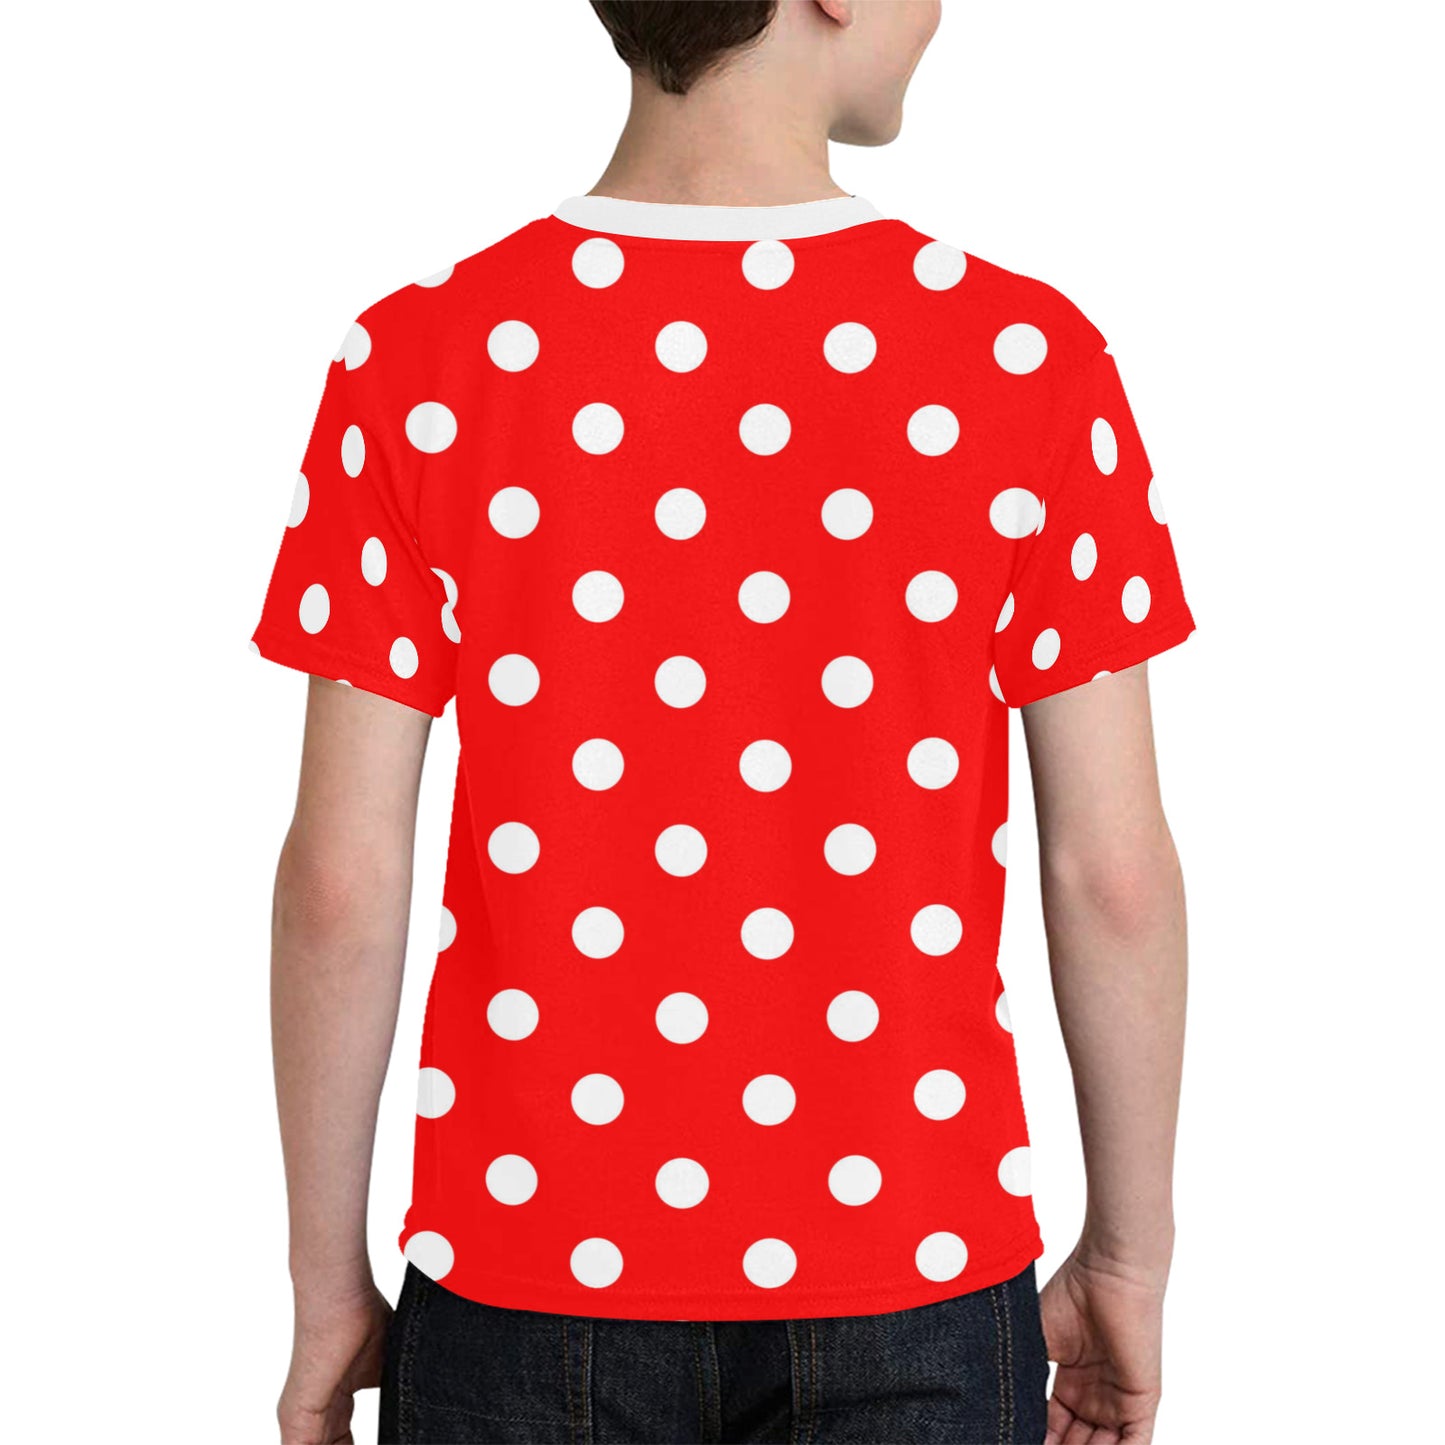 Red With White Polka Dots Kids' T-shirt